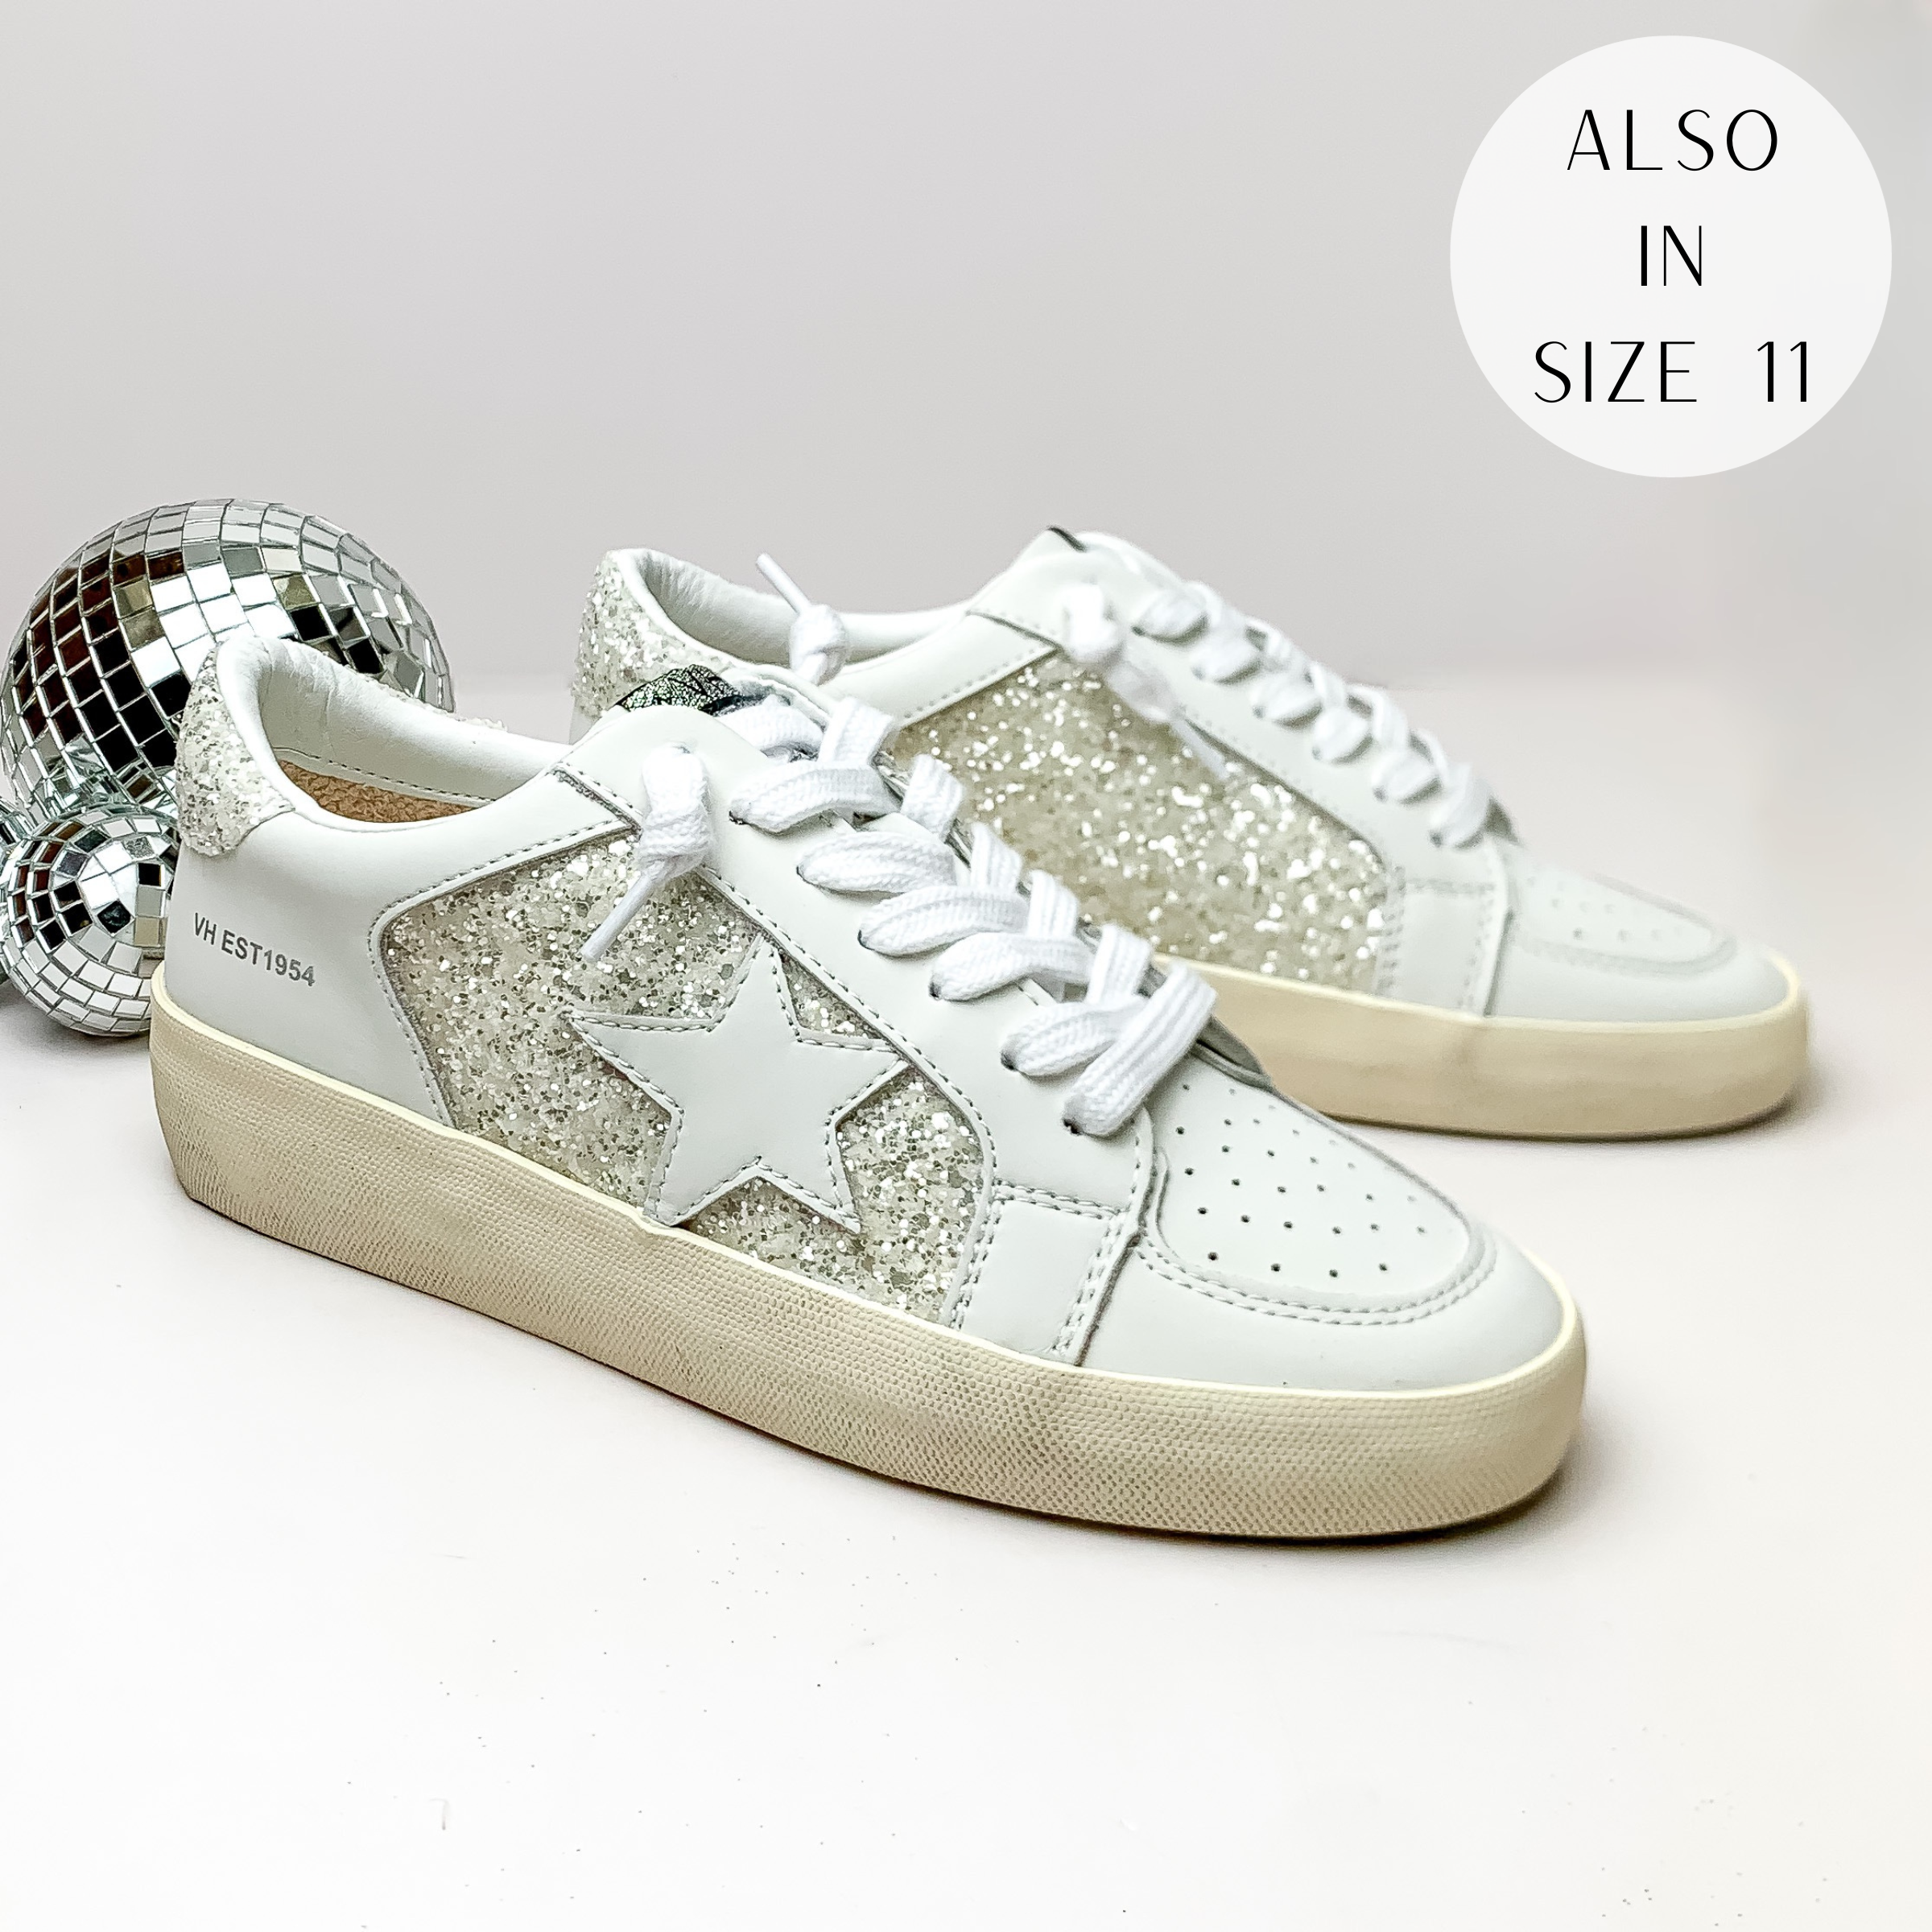 Pictured is a pair of white tennis shoes with a white star on the side and white glitter detailing. These shoes are pictured on a white background with disco balls on the left side.